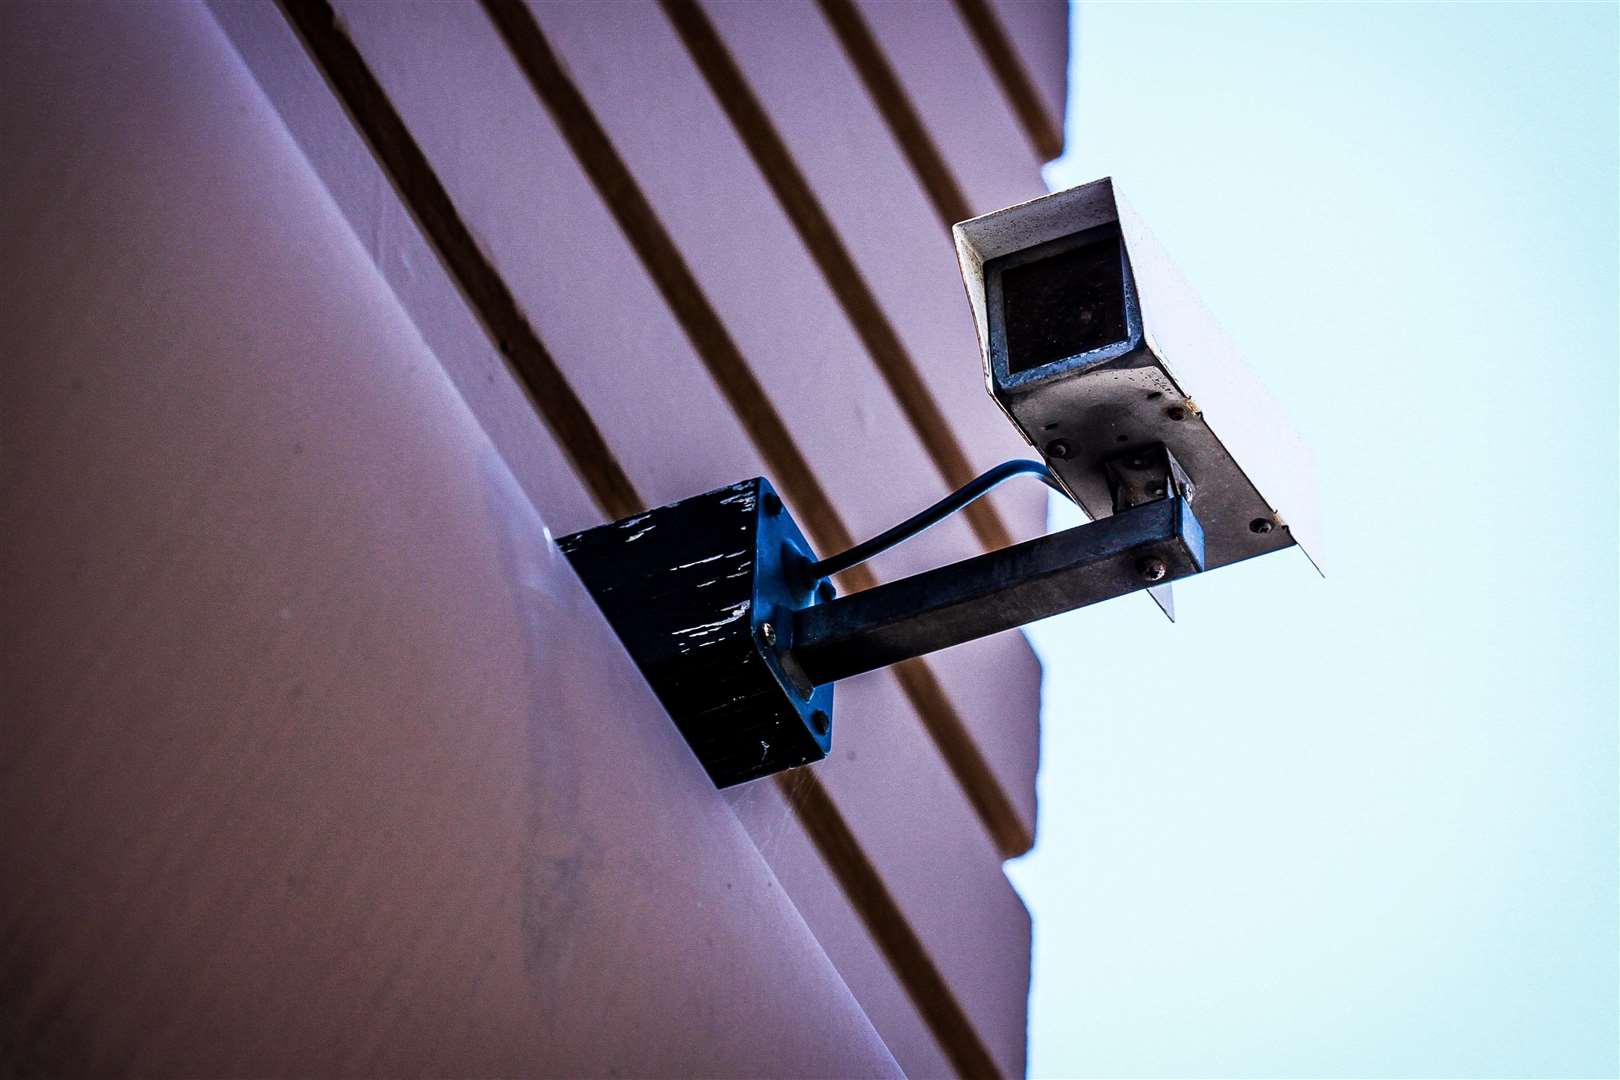 MCG's management of CCTV in the Towns has been called into question